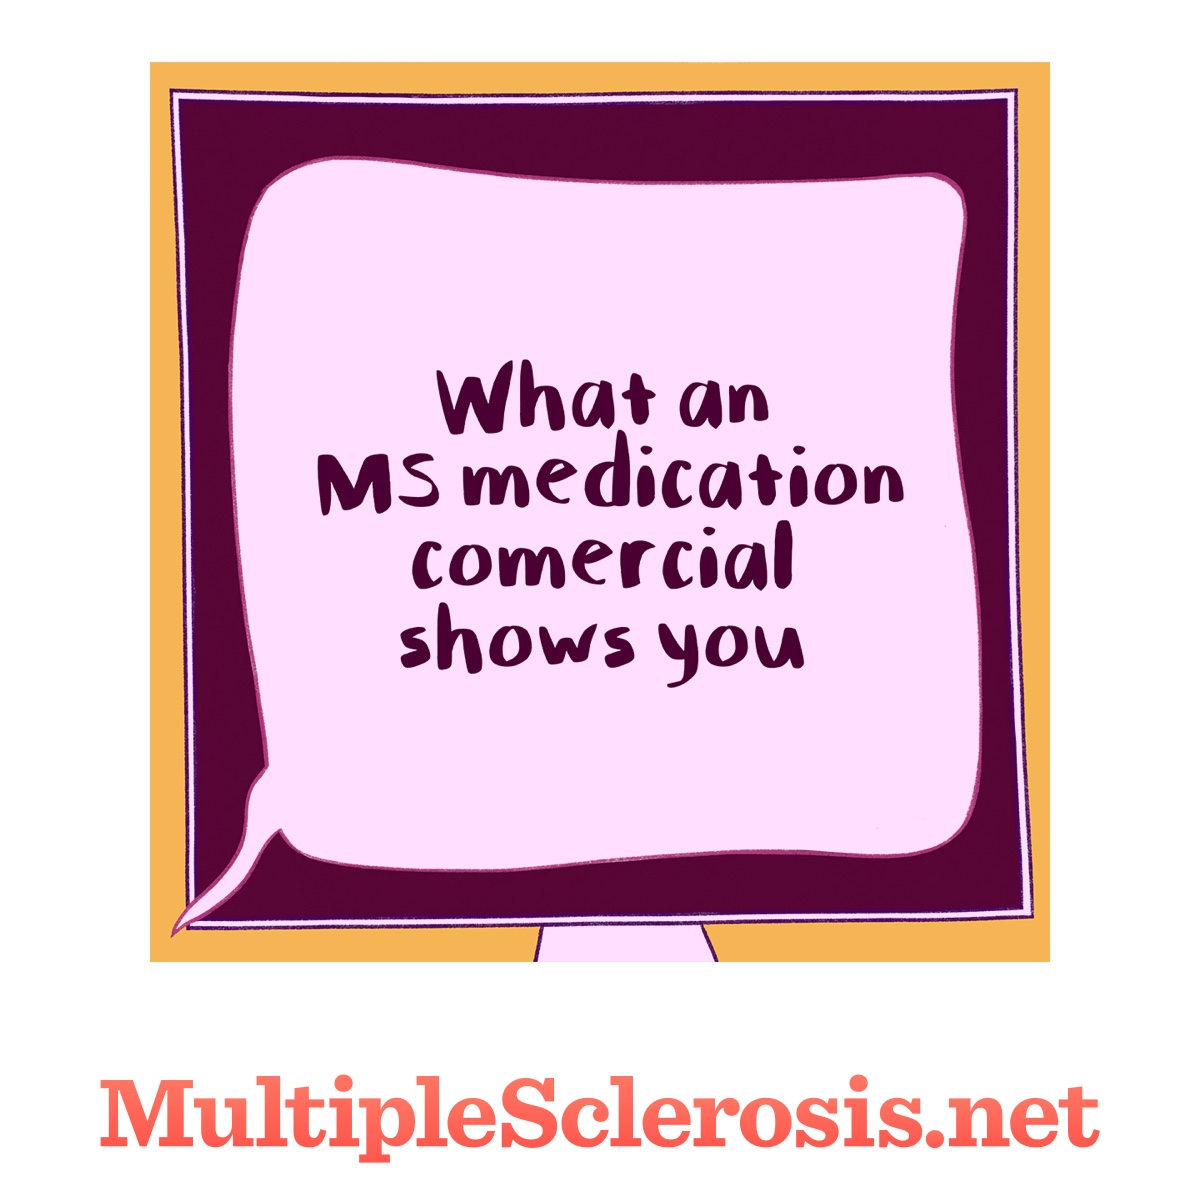 Image text reads: what an MS medication commercial shows you